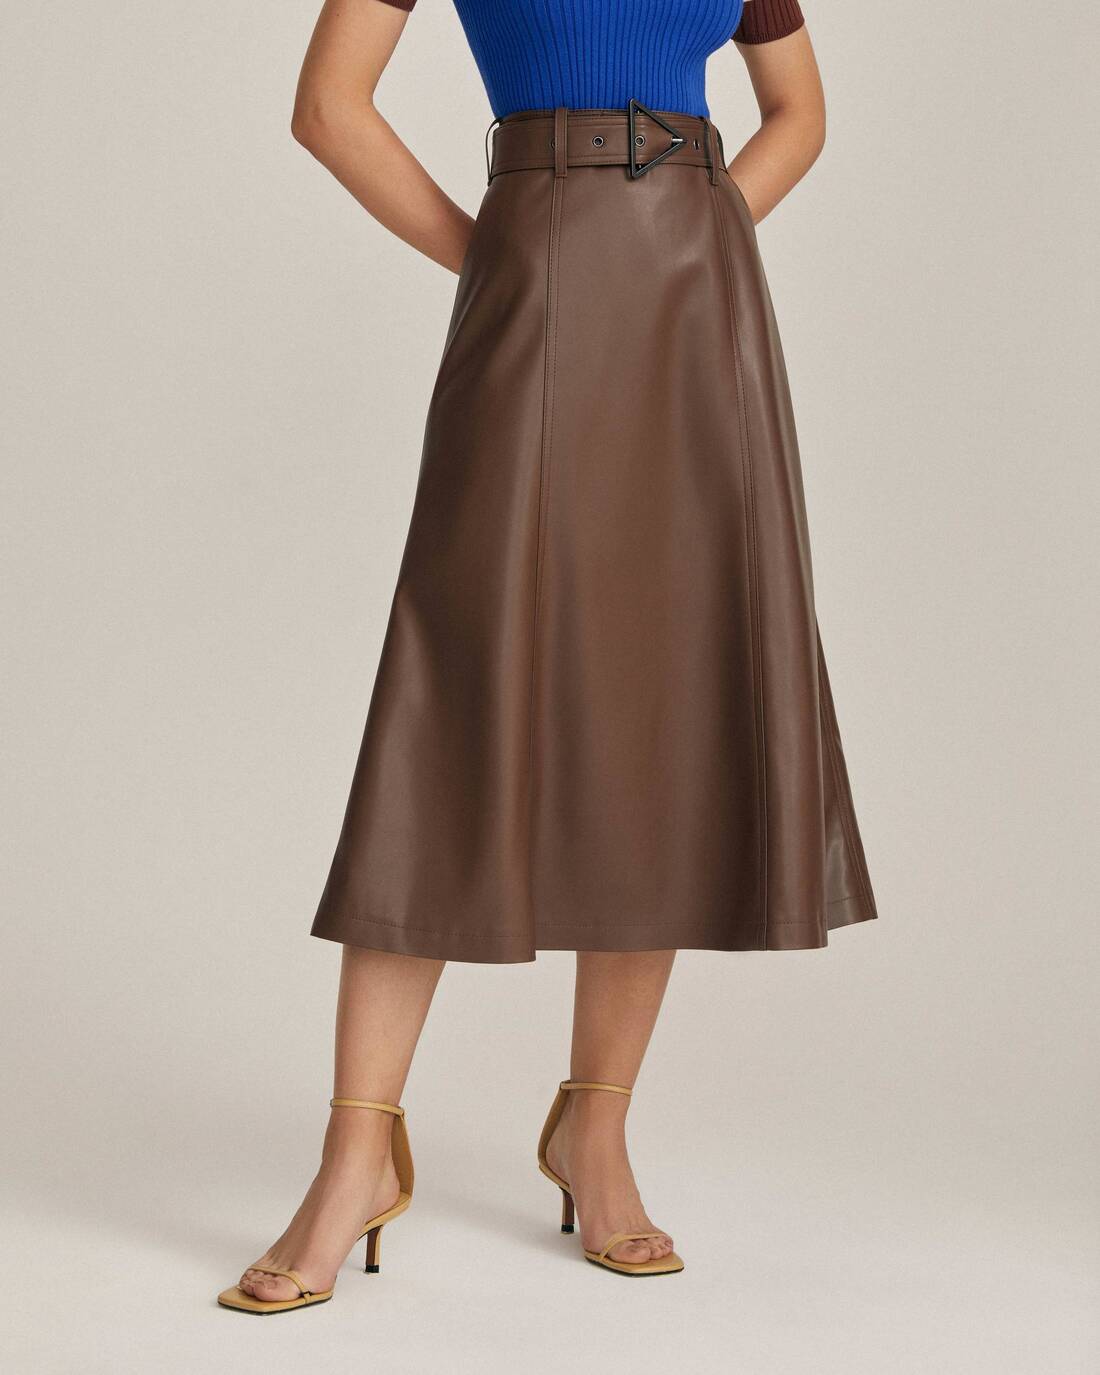 Flared skirt with from eco-leather